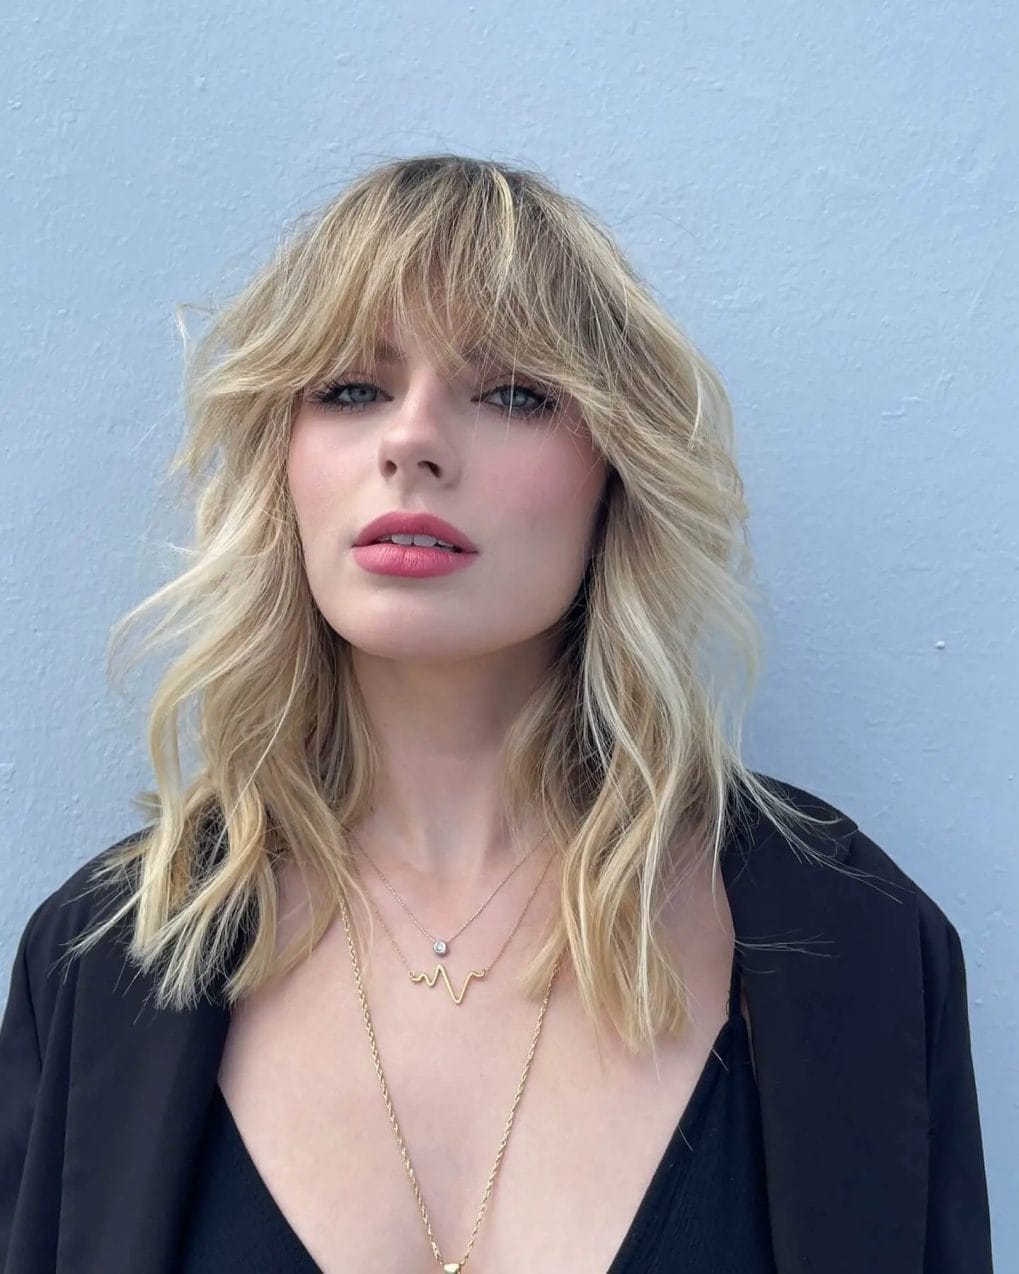 Textured blonde waves with modern shaggy curtain bangs